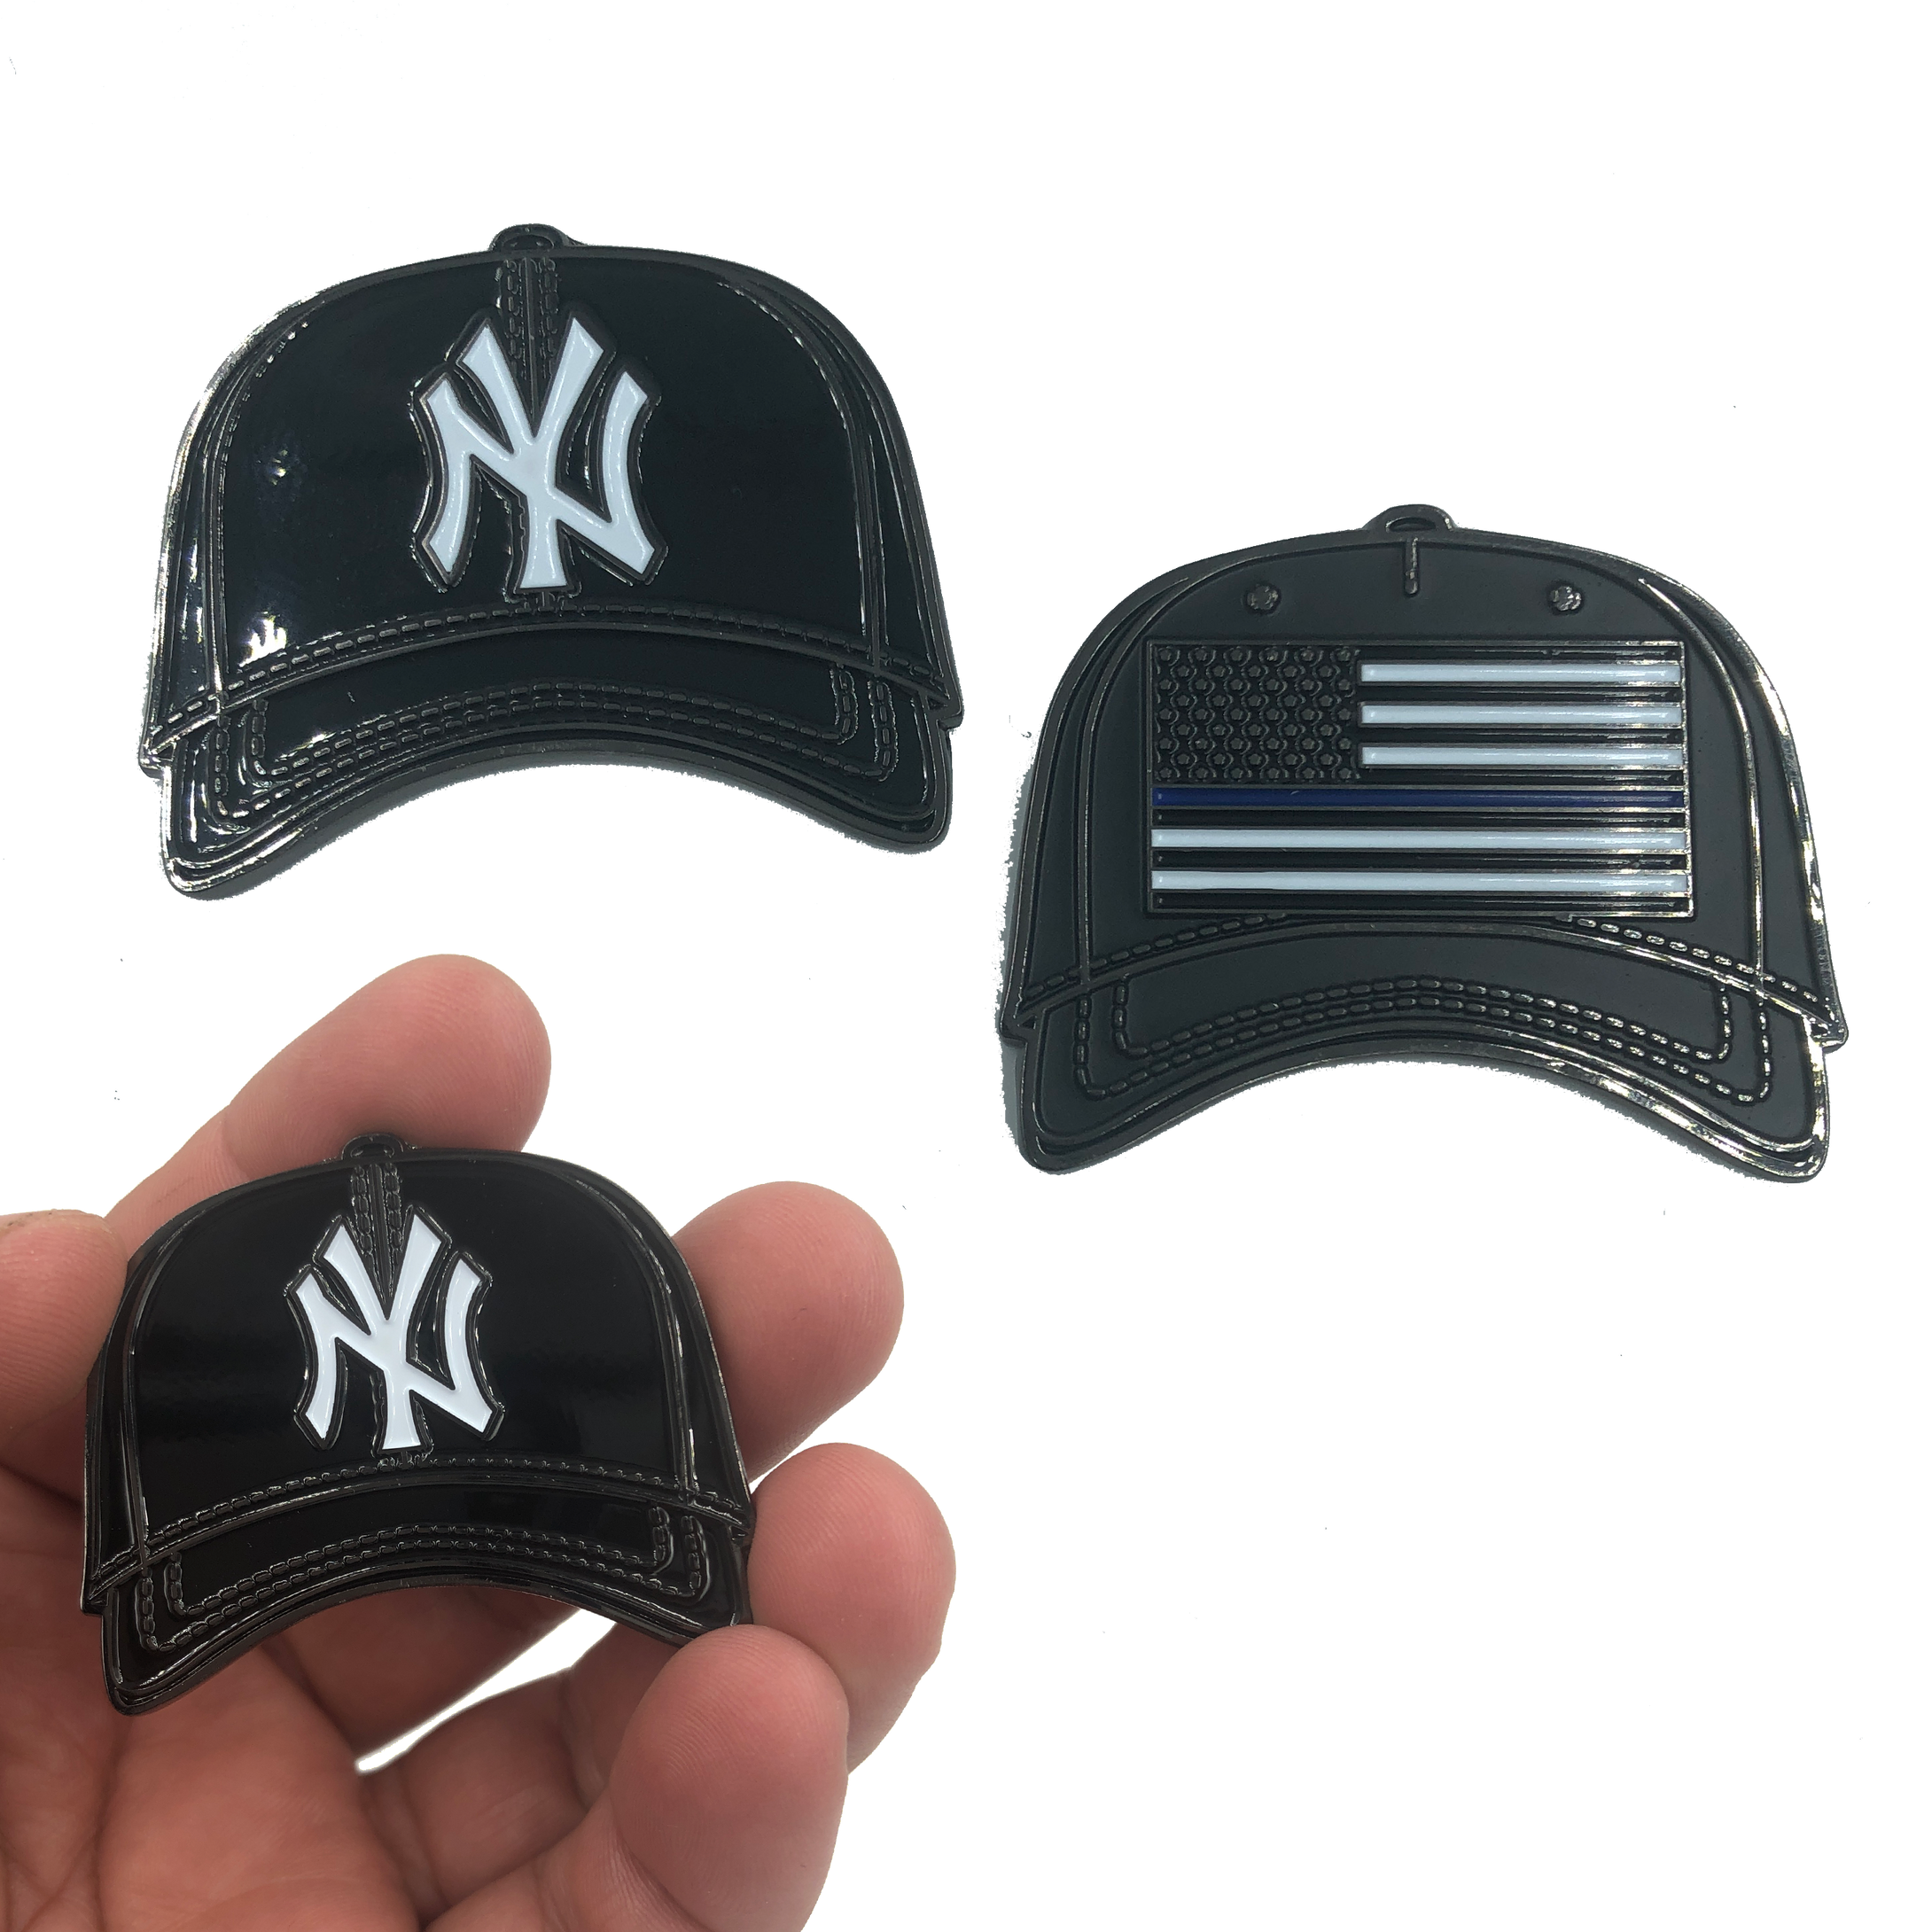 FF-011 New York Yankees Hat Thin Blue Line Challenge Coin Police NYPD Jeter